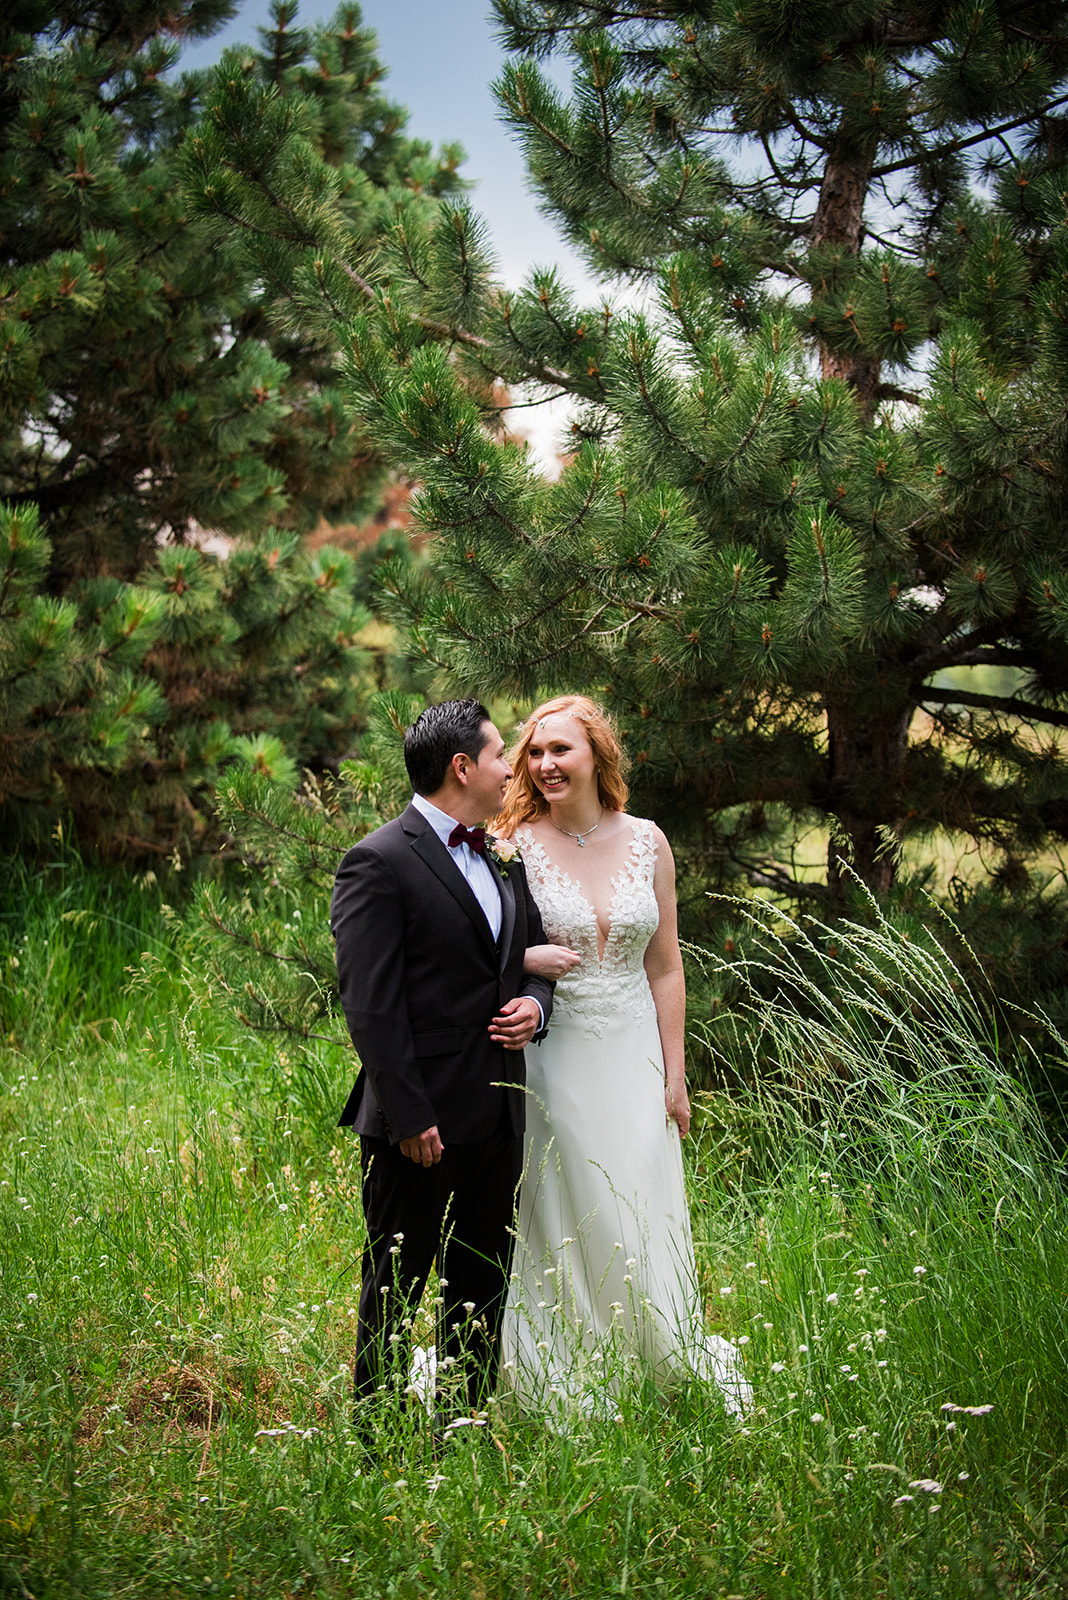 The bride and groom stand arm in arm in a green wooded area.